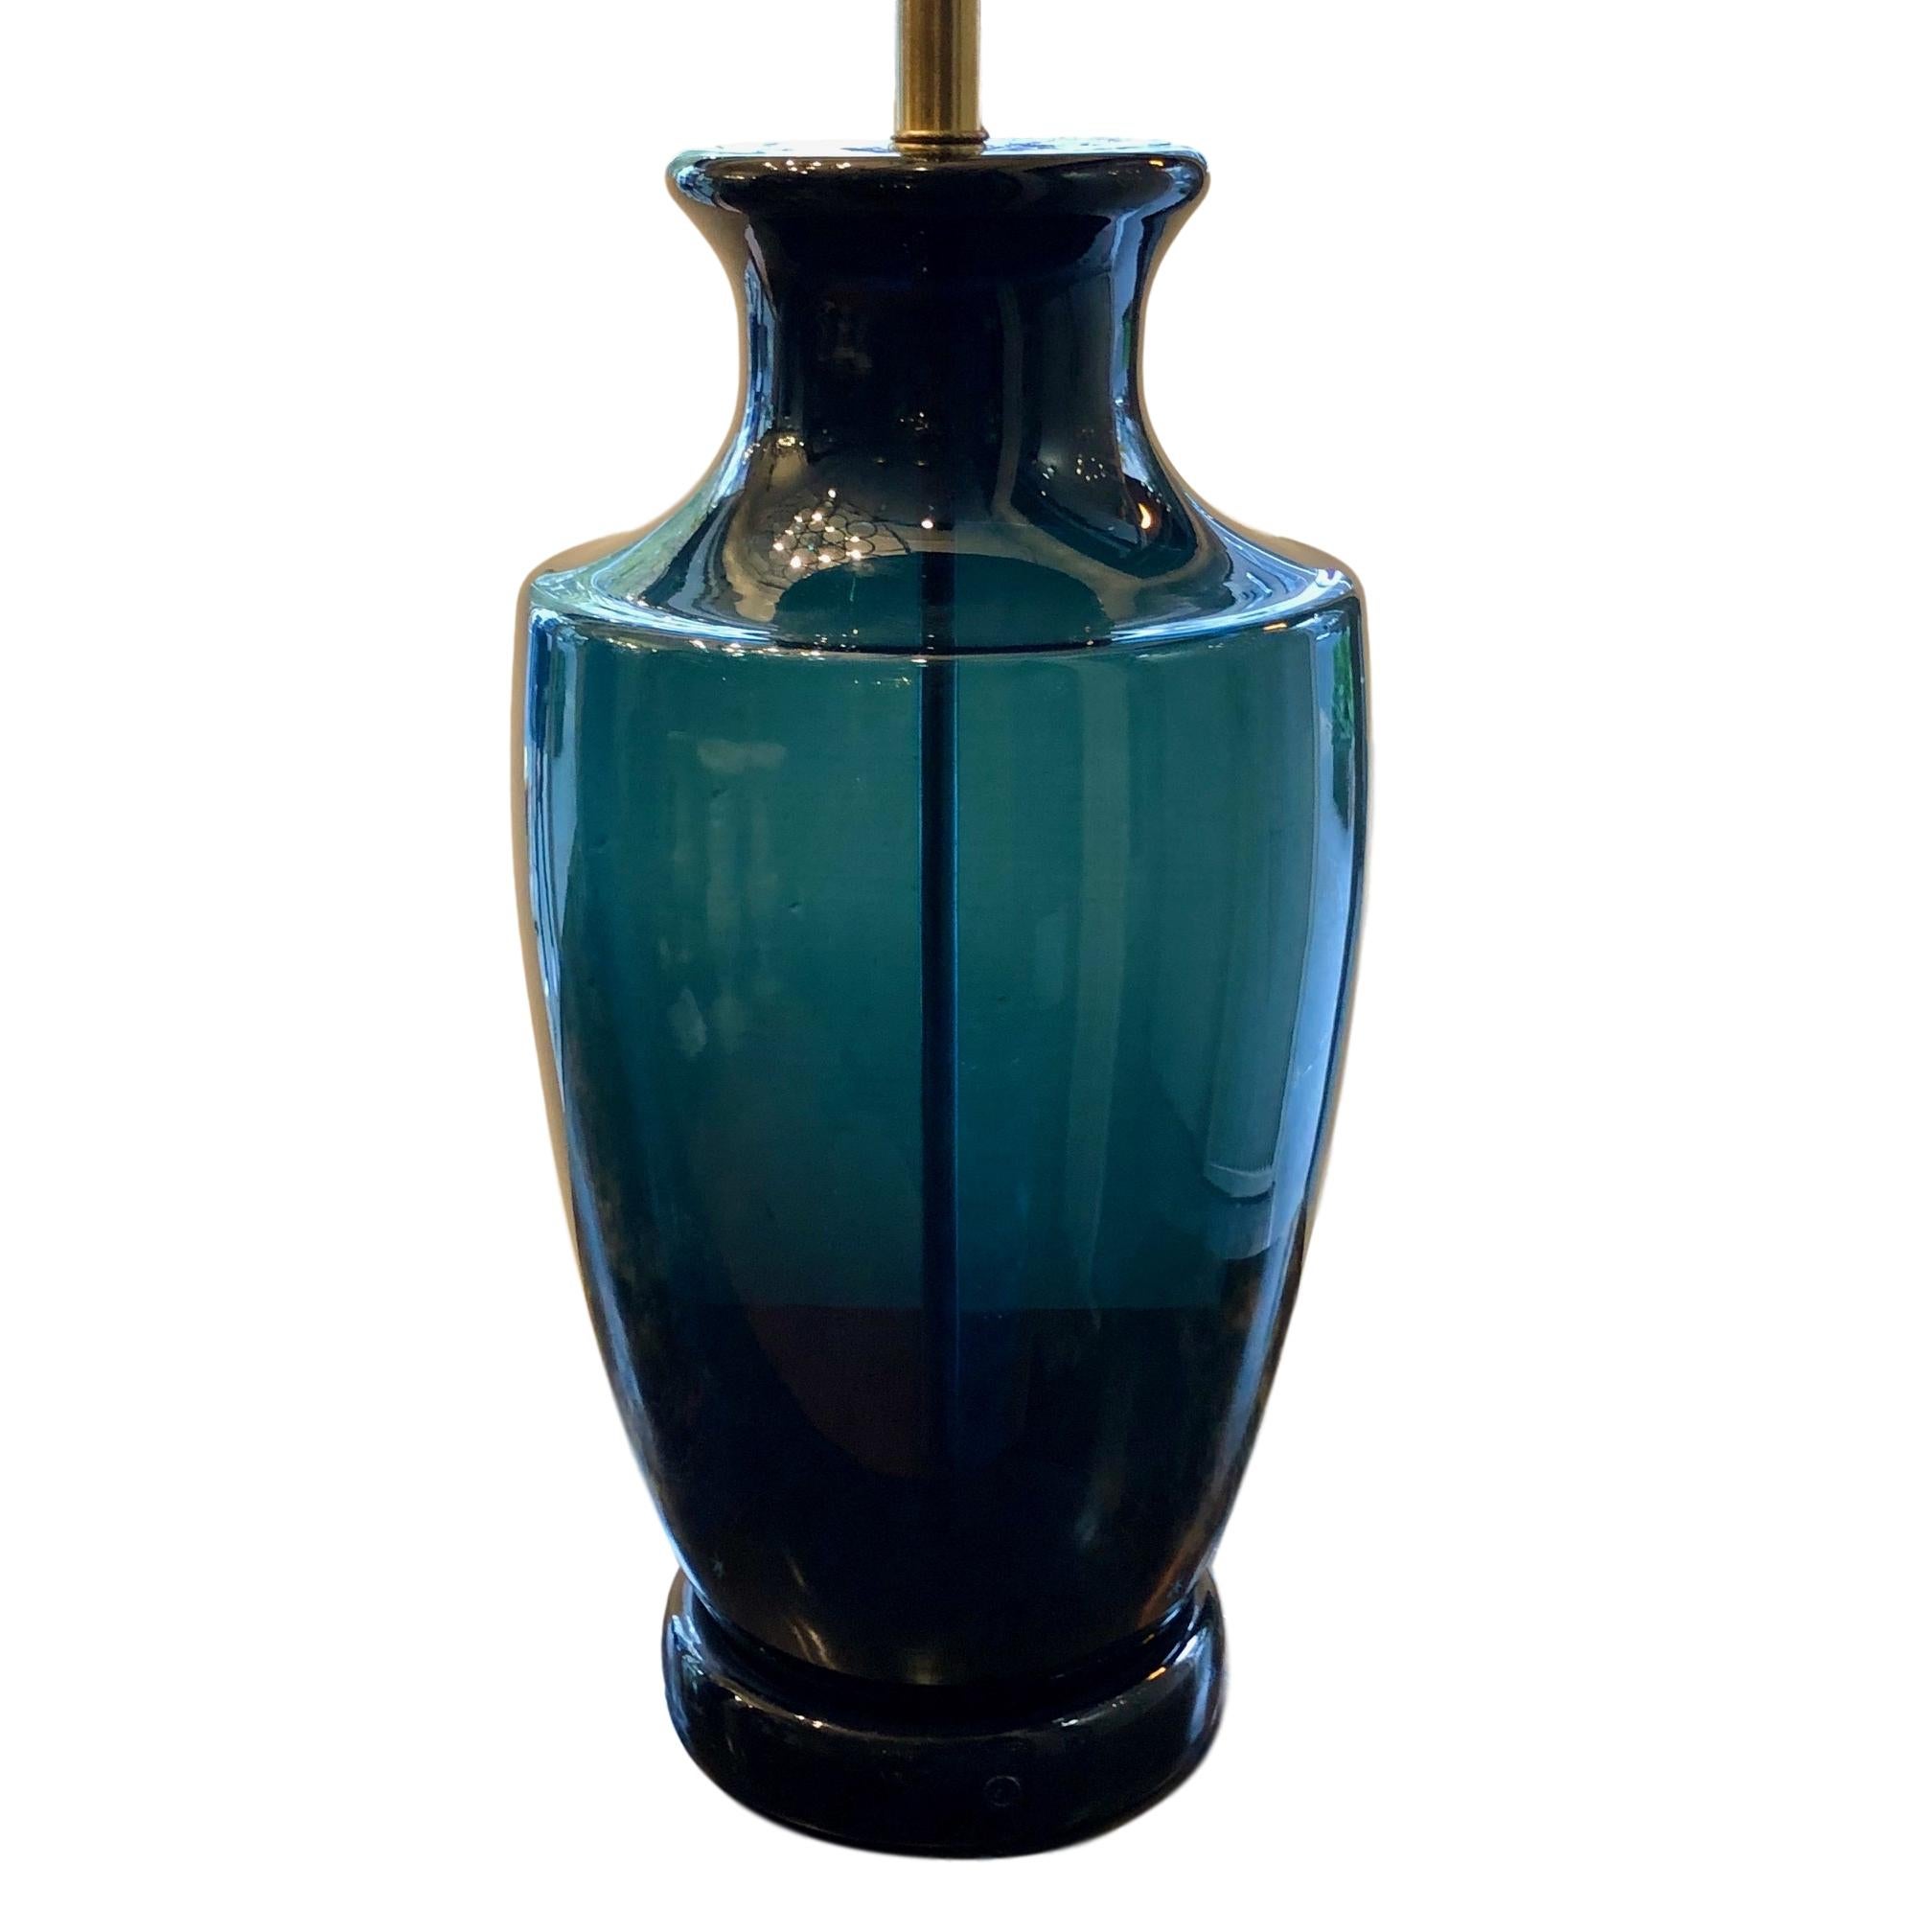 A large circa 1960s Italian blown glass deep blue table lamp.

Measurements:
Height of body 20.5?
Diameter 9.25?